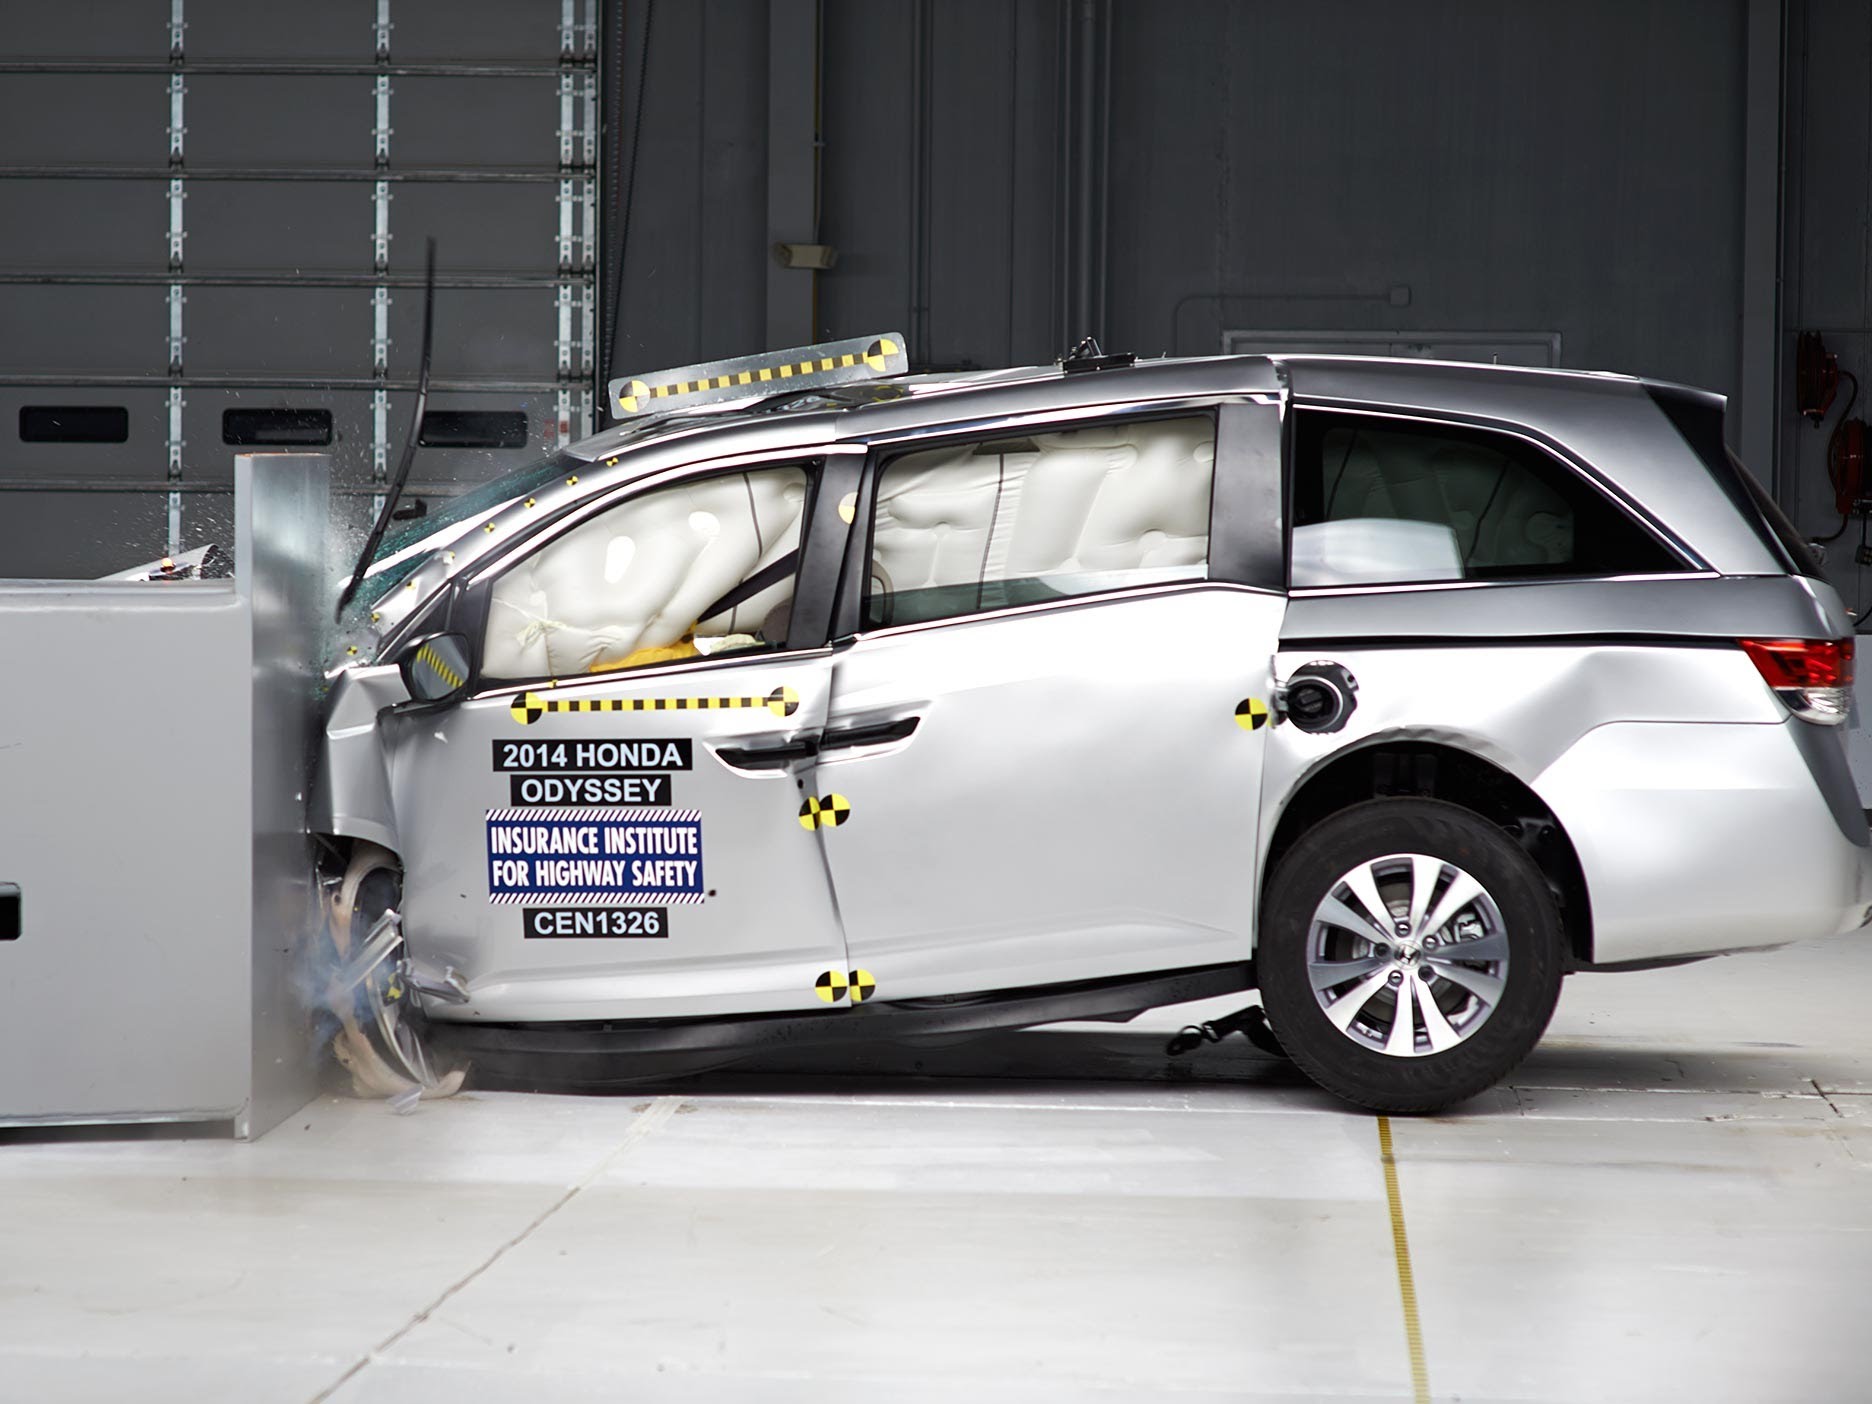 Honda Odyssey is first minivan to earn the IIHS TOP SAFETY